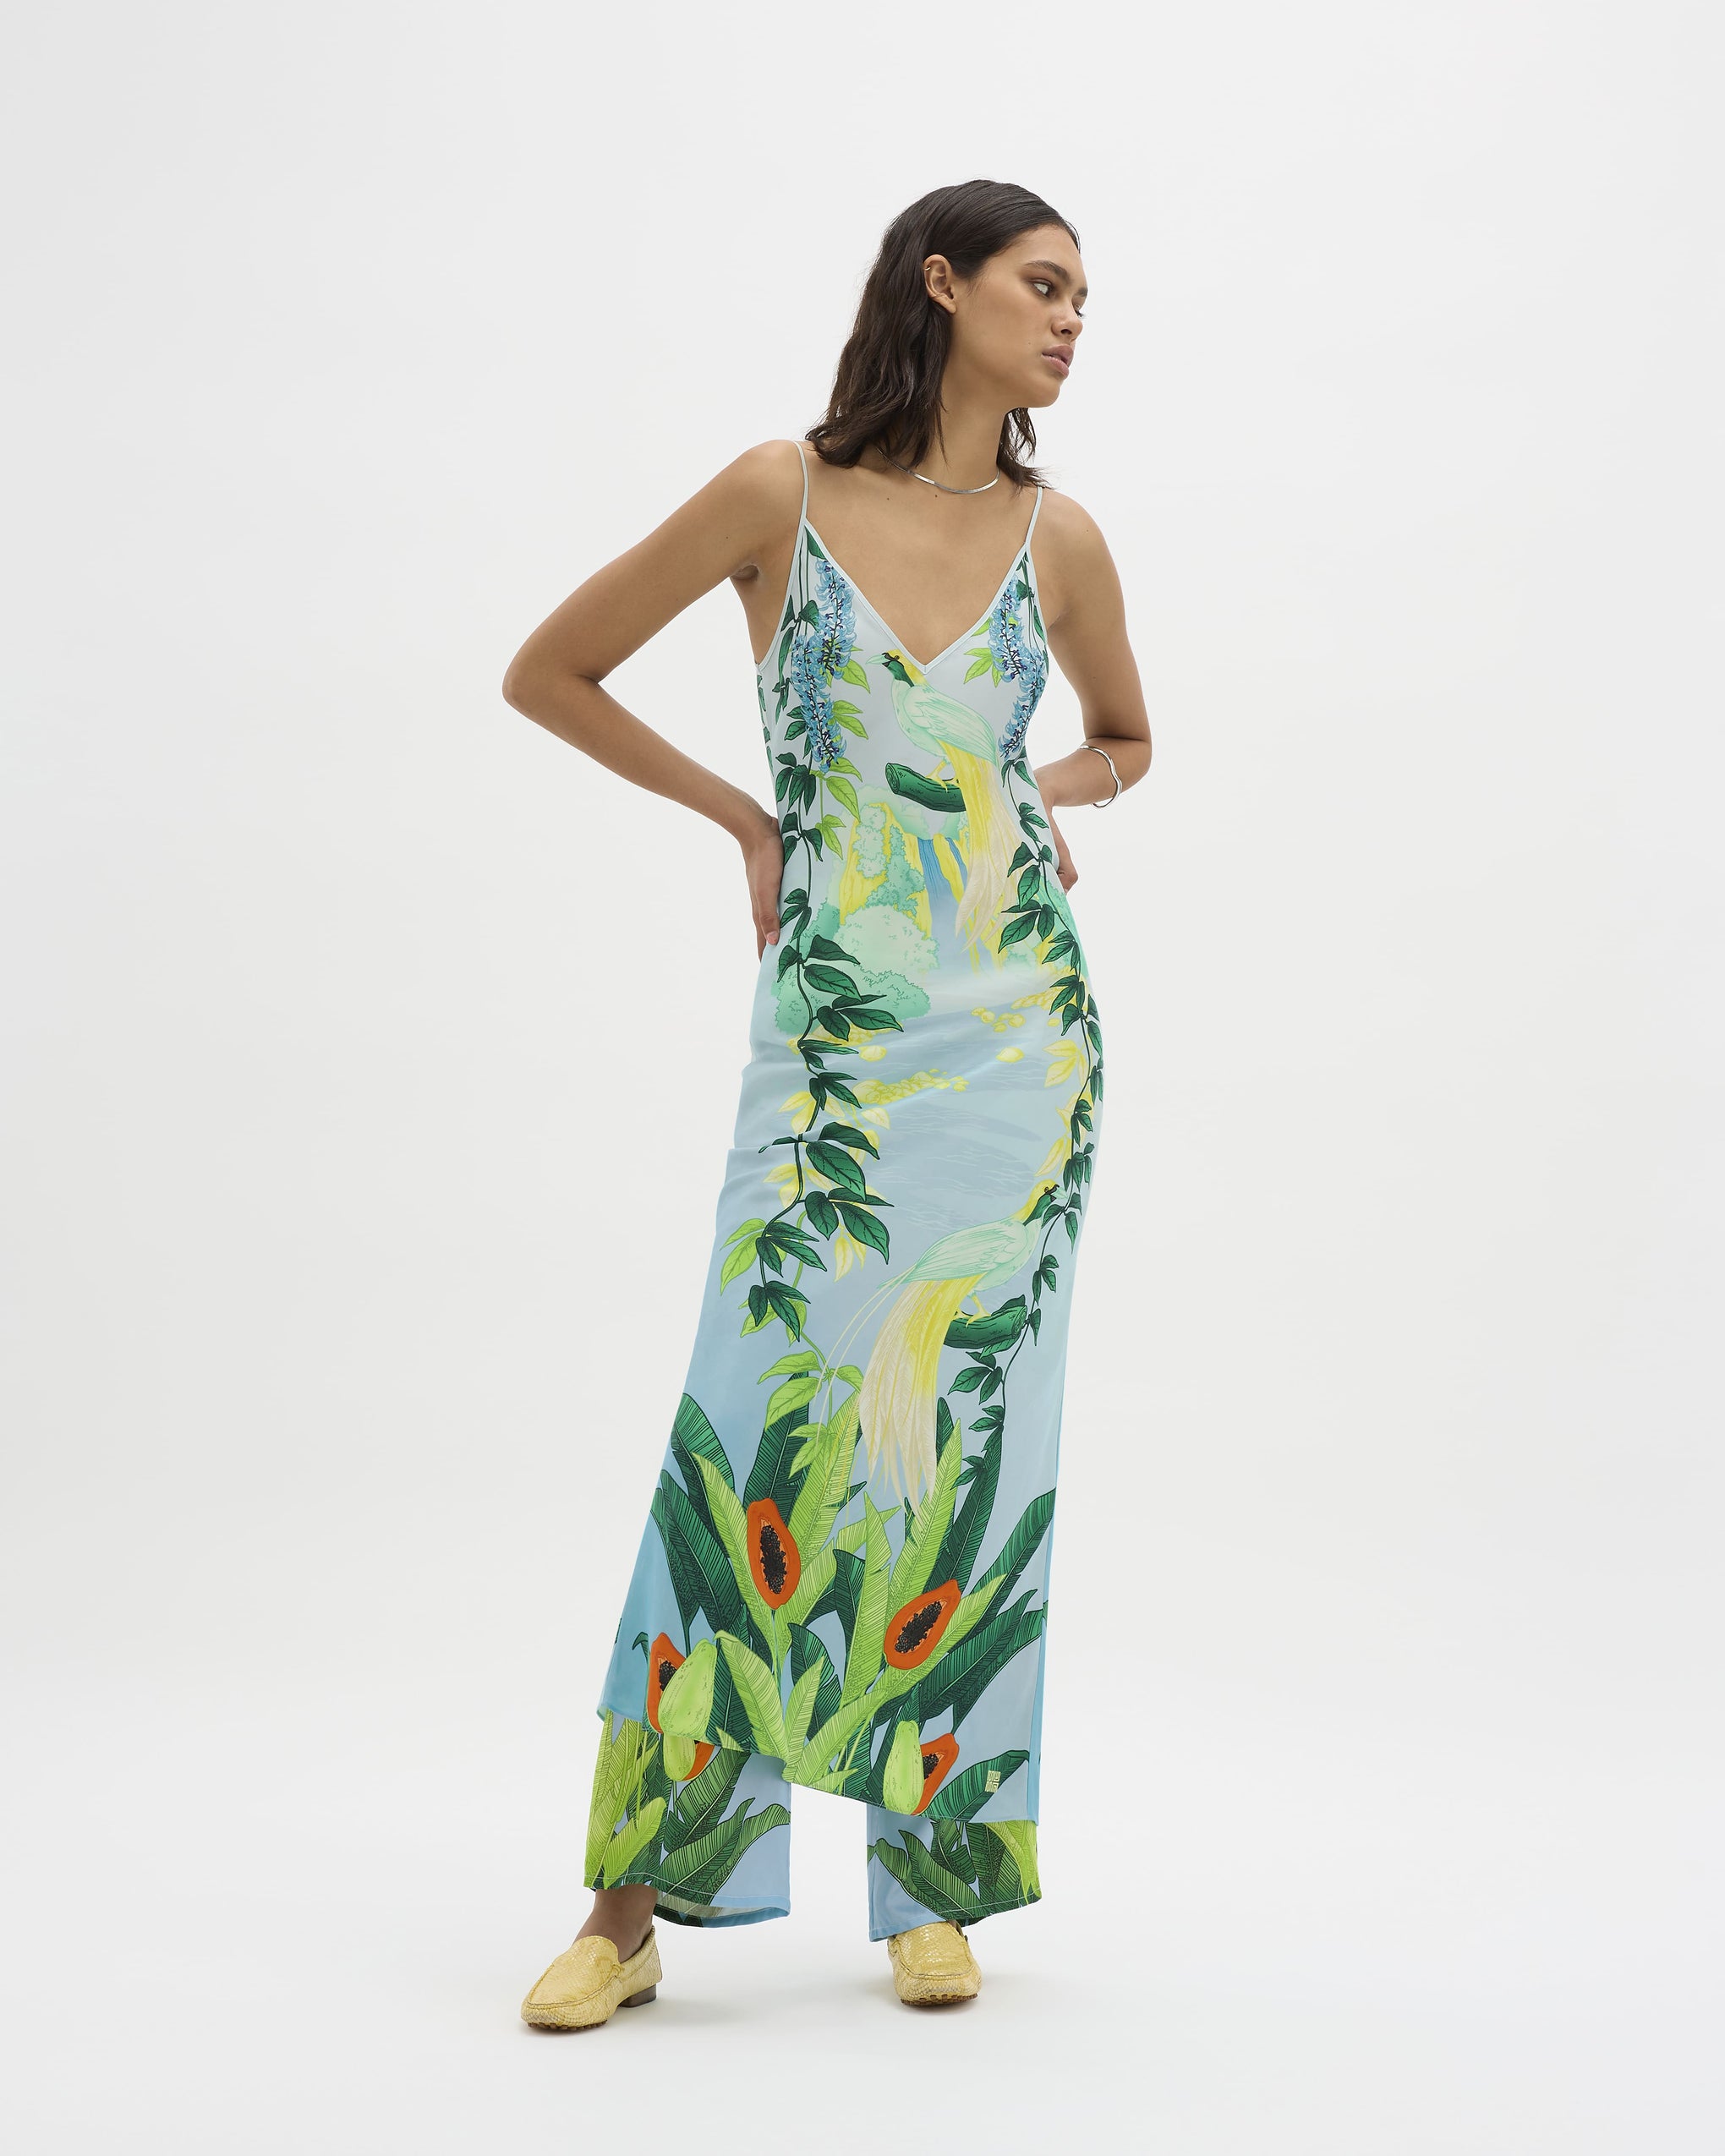 Muma World Eden Illustrated Bias Maxi Dress in Blue available at The New Trend Australia.